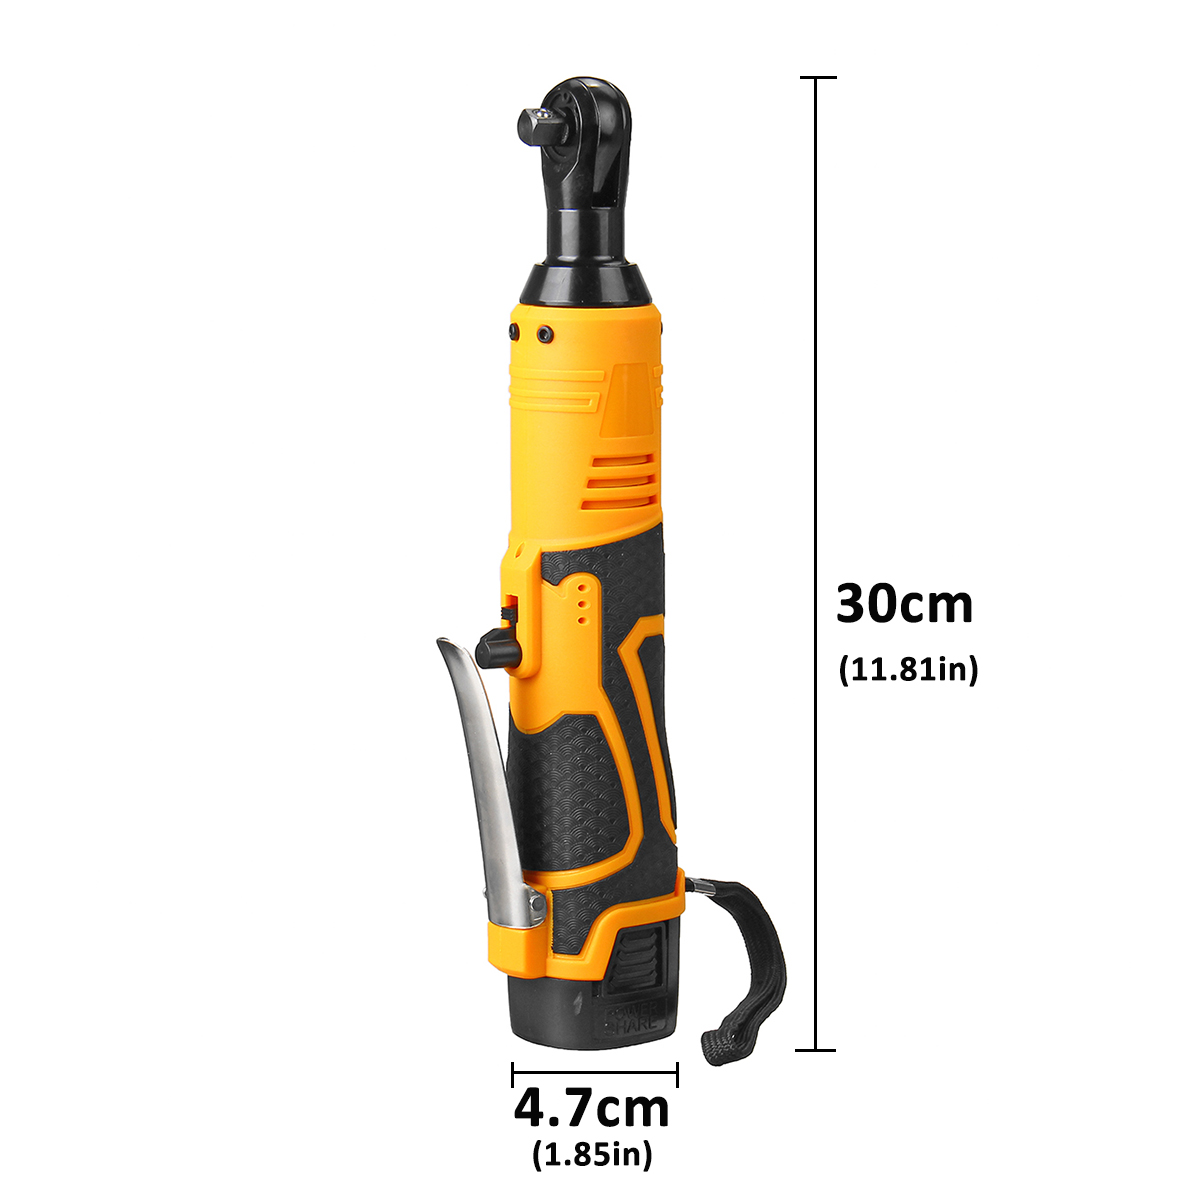 18V-Power-Cordless-Ratchet-Wrench-Li-ion-Electric-Wrench-4200mah-Max-Torque-65-Compact-Size-Battery--1560568-8